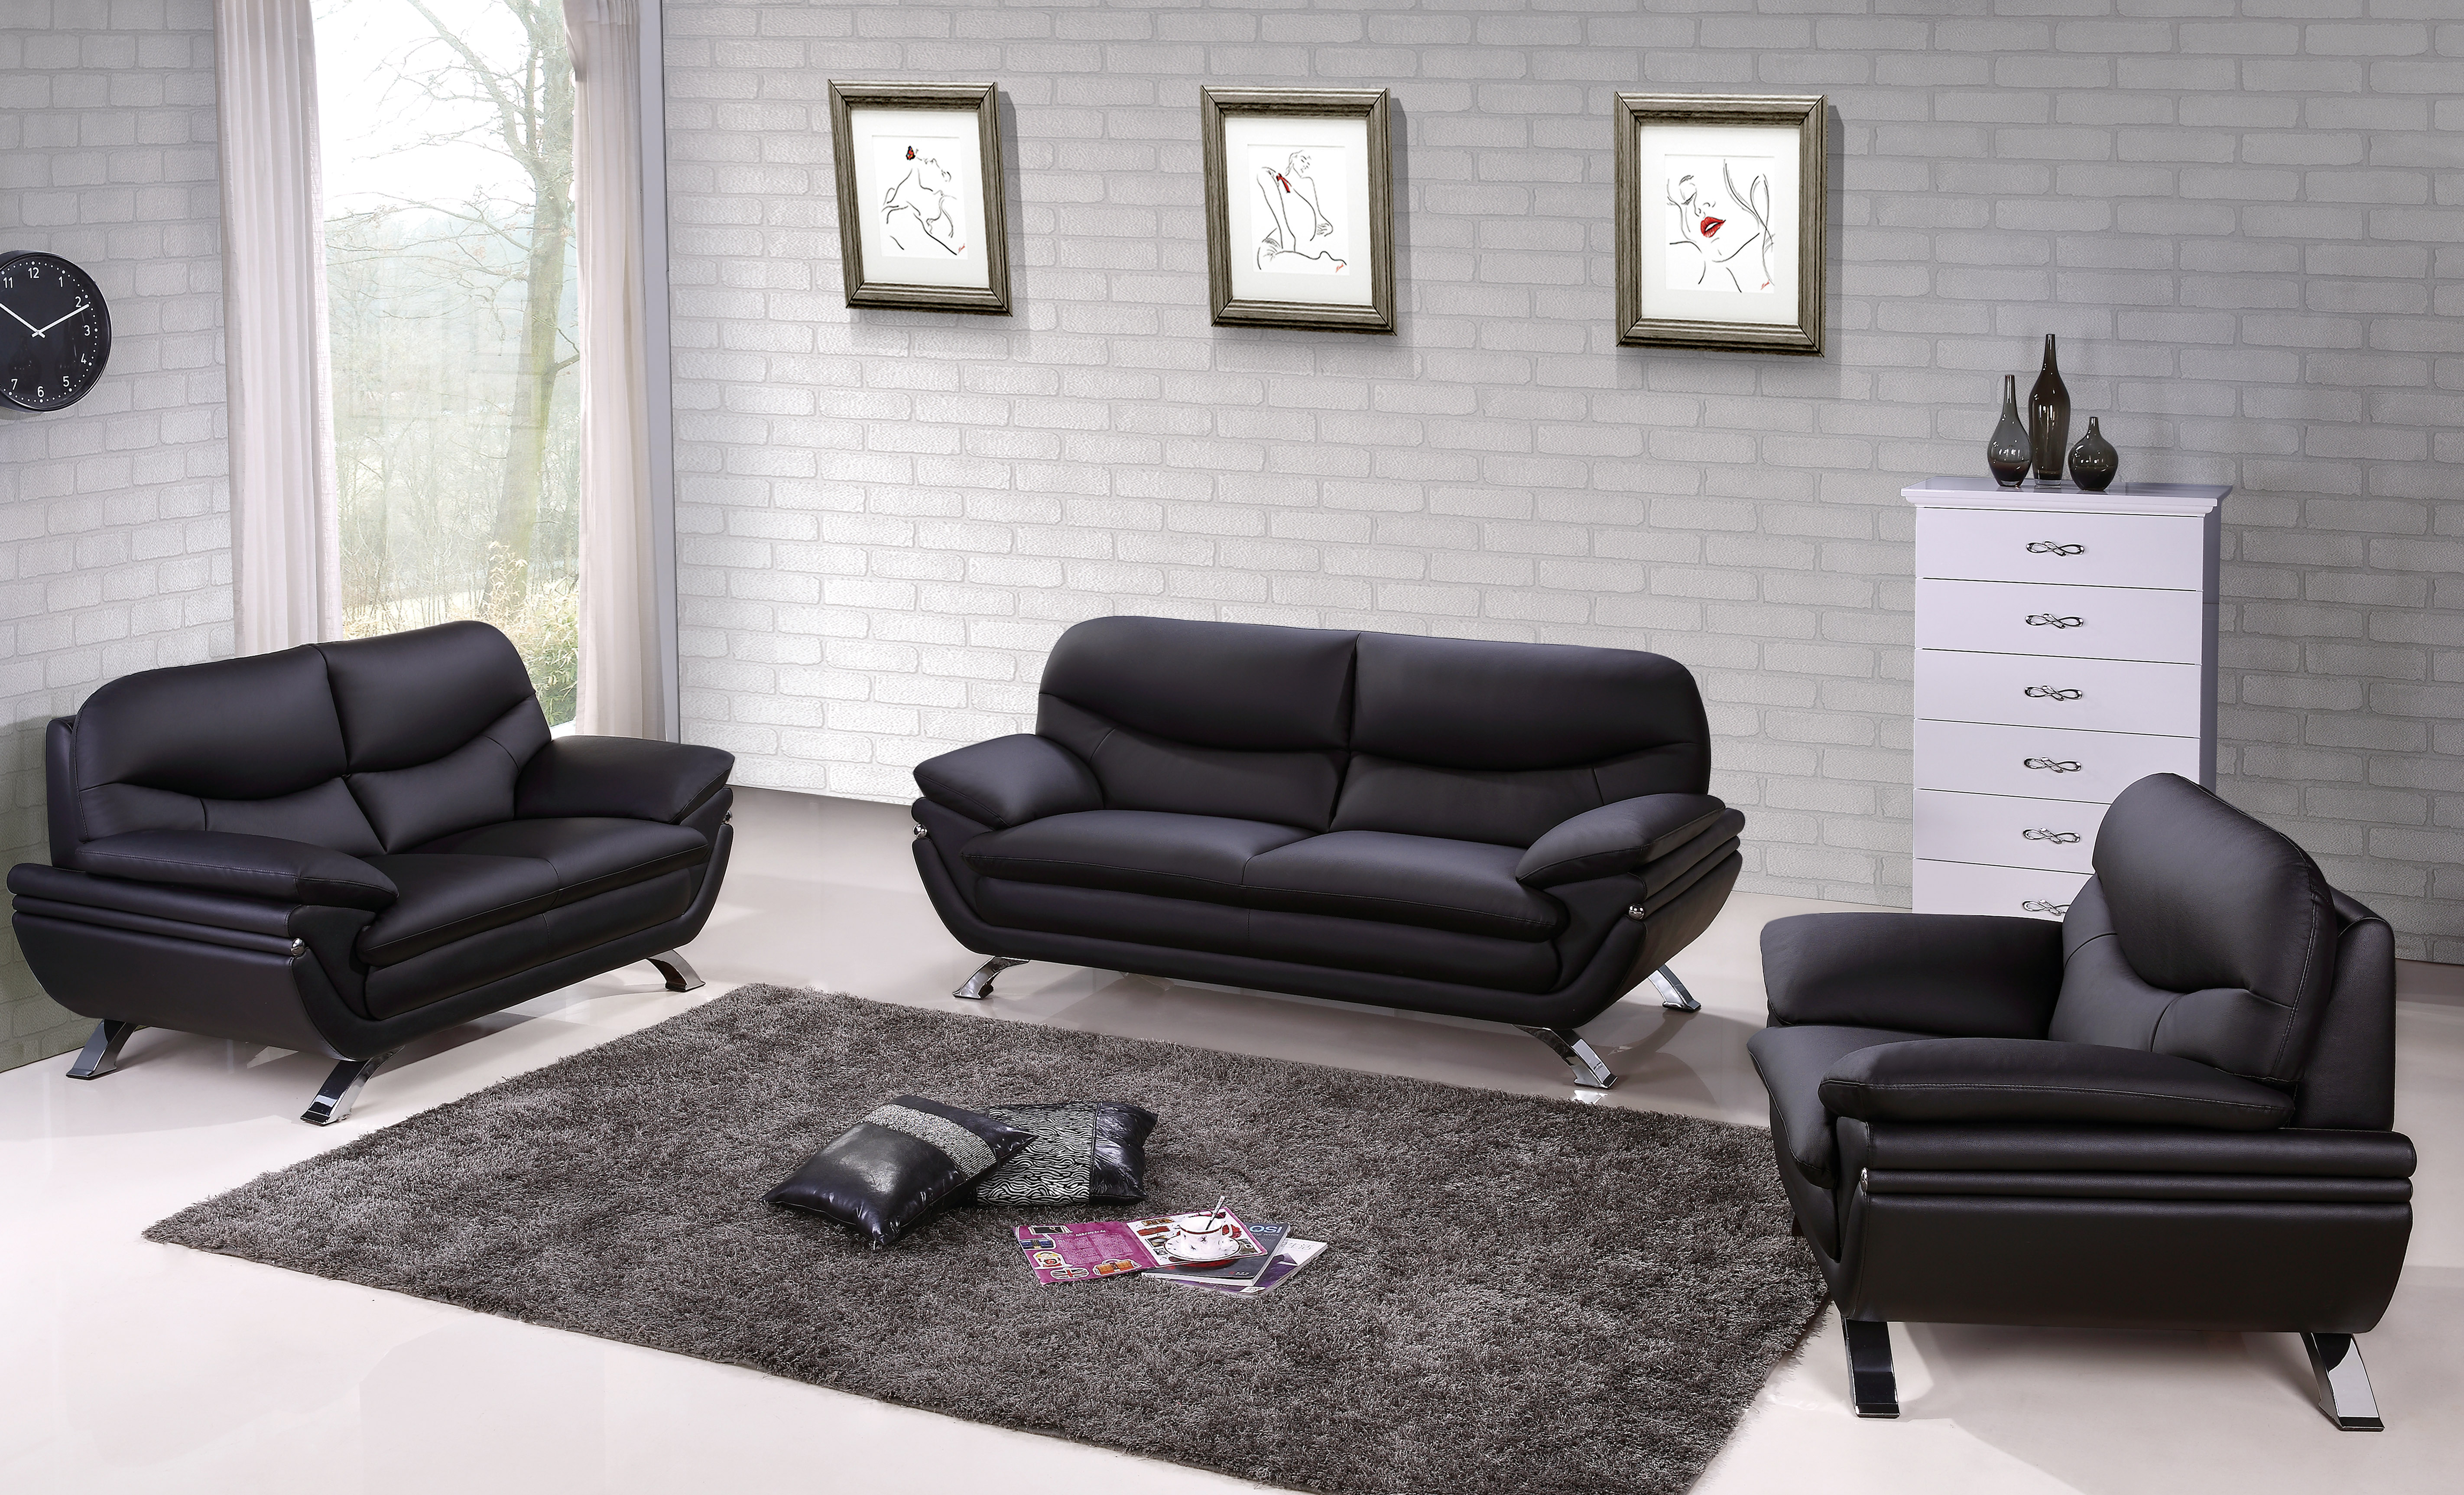 Images Of Sofa Set For Living Room